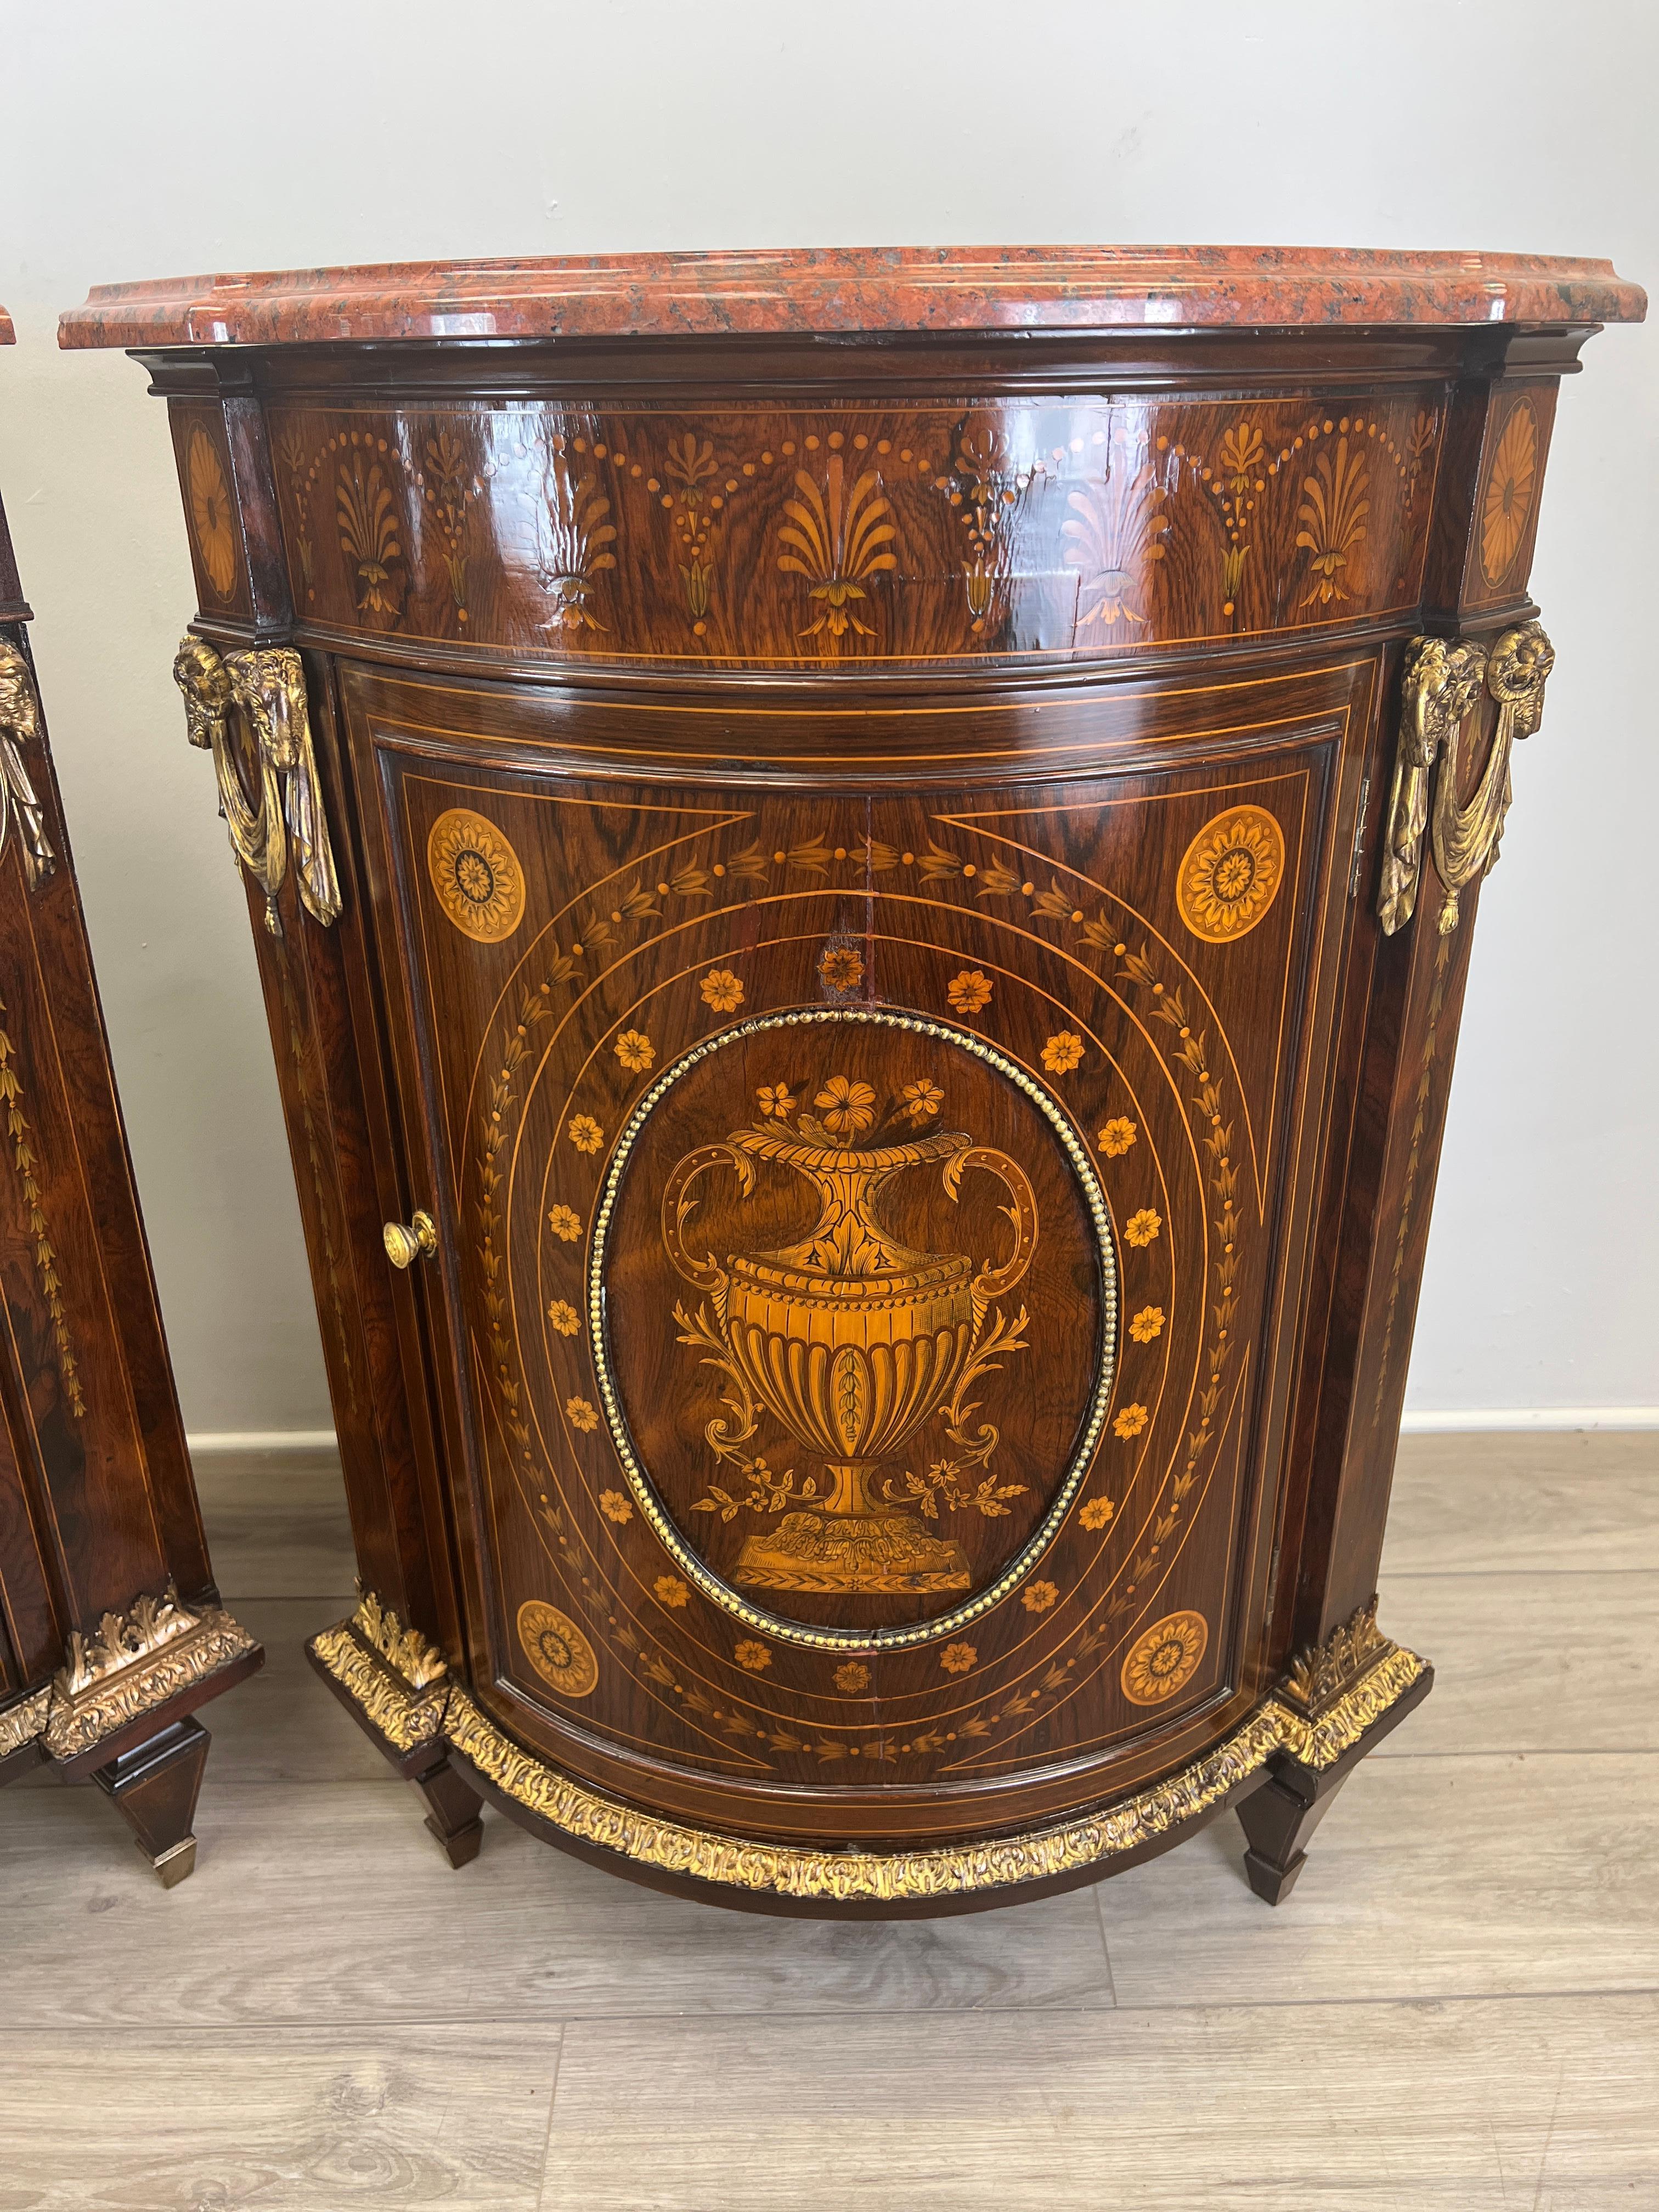 Featured is a pair of French Napoleon III neo classical Encoignure cabinet's in rosewood mounted with gilt bronze foliate and heavily inlaid with neoclassical themes throughout. The cabinets themselves are decorated with palmetto inlay patterns of